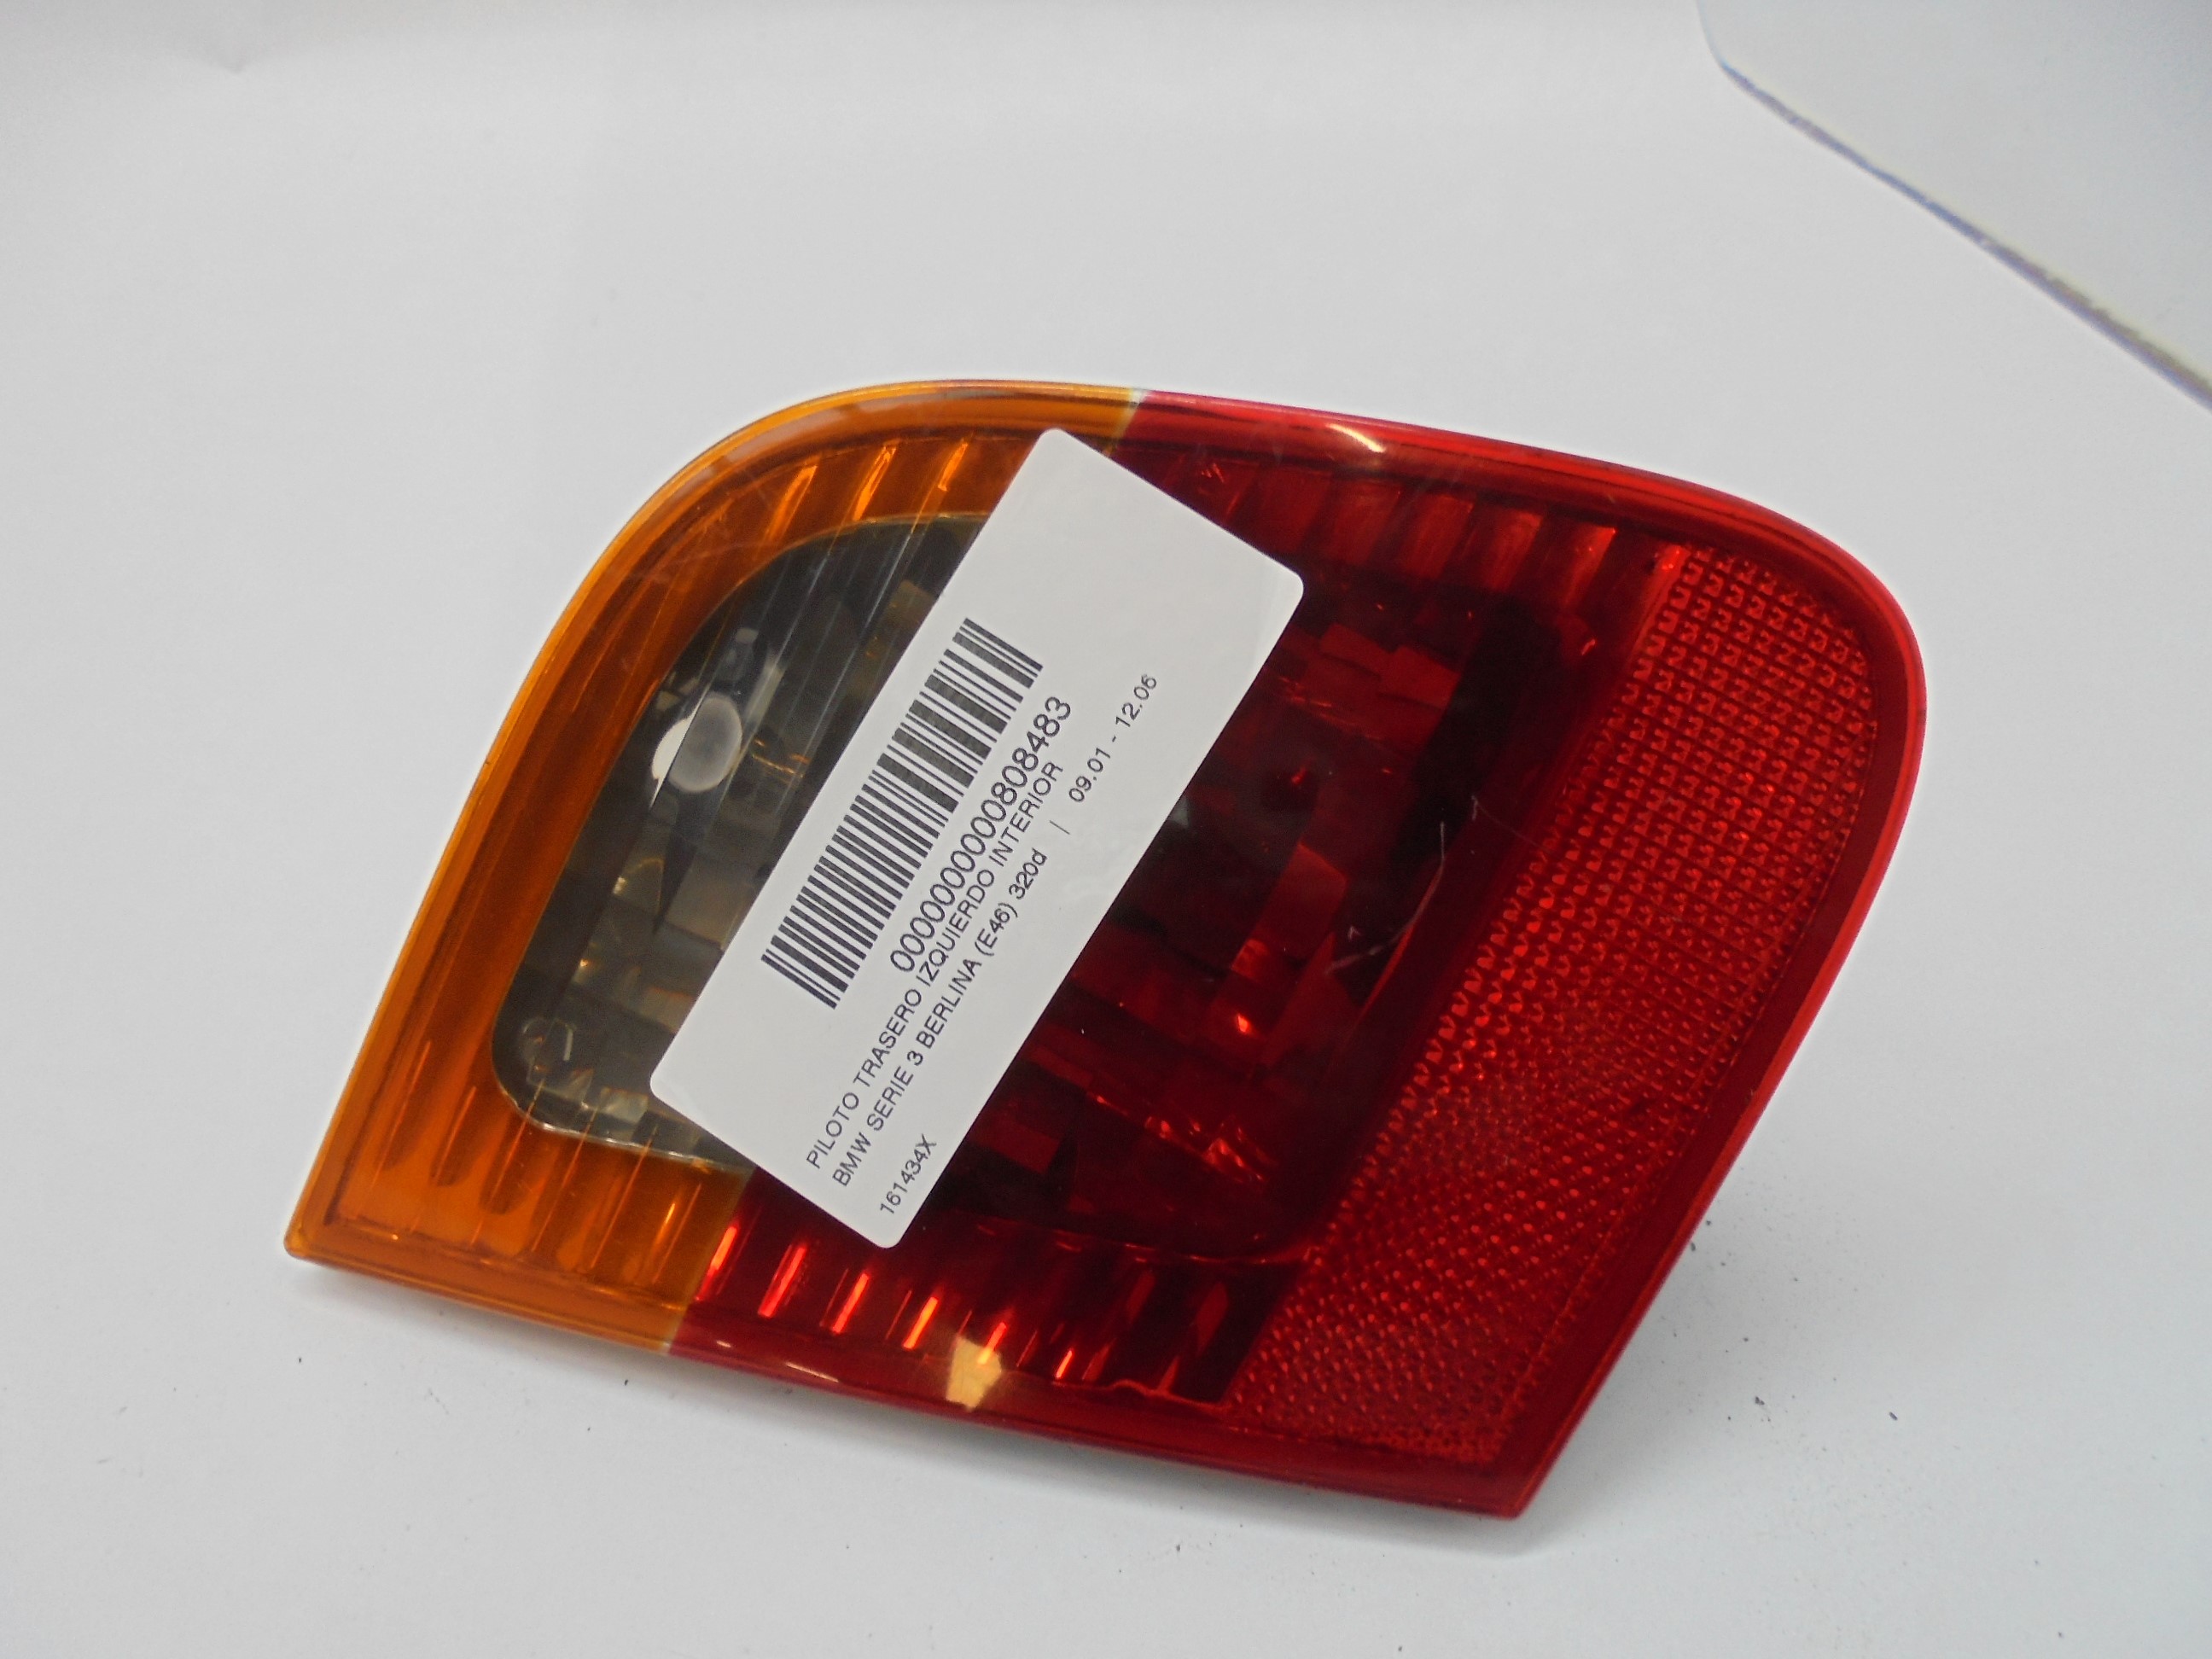 BMW 3 Series E46 (1997-2006) Rear Left Taillight 63216907945 25124136